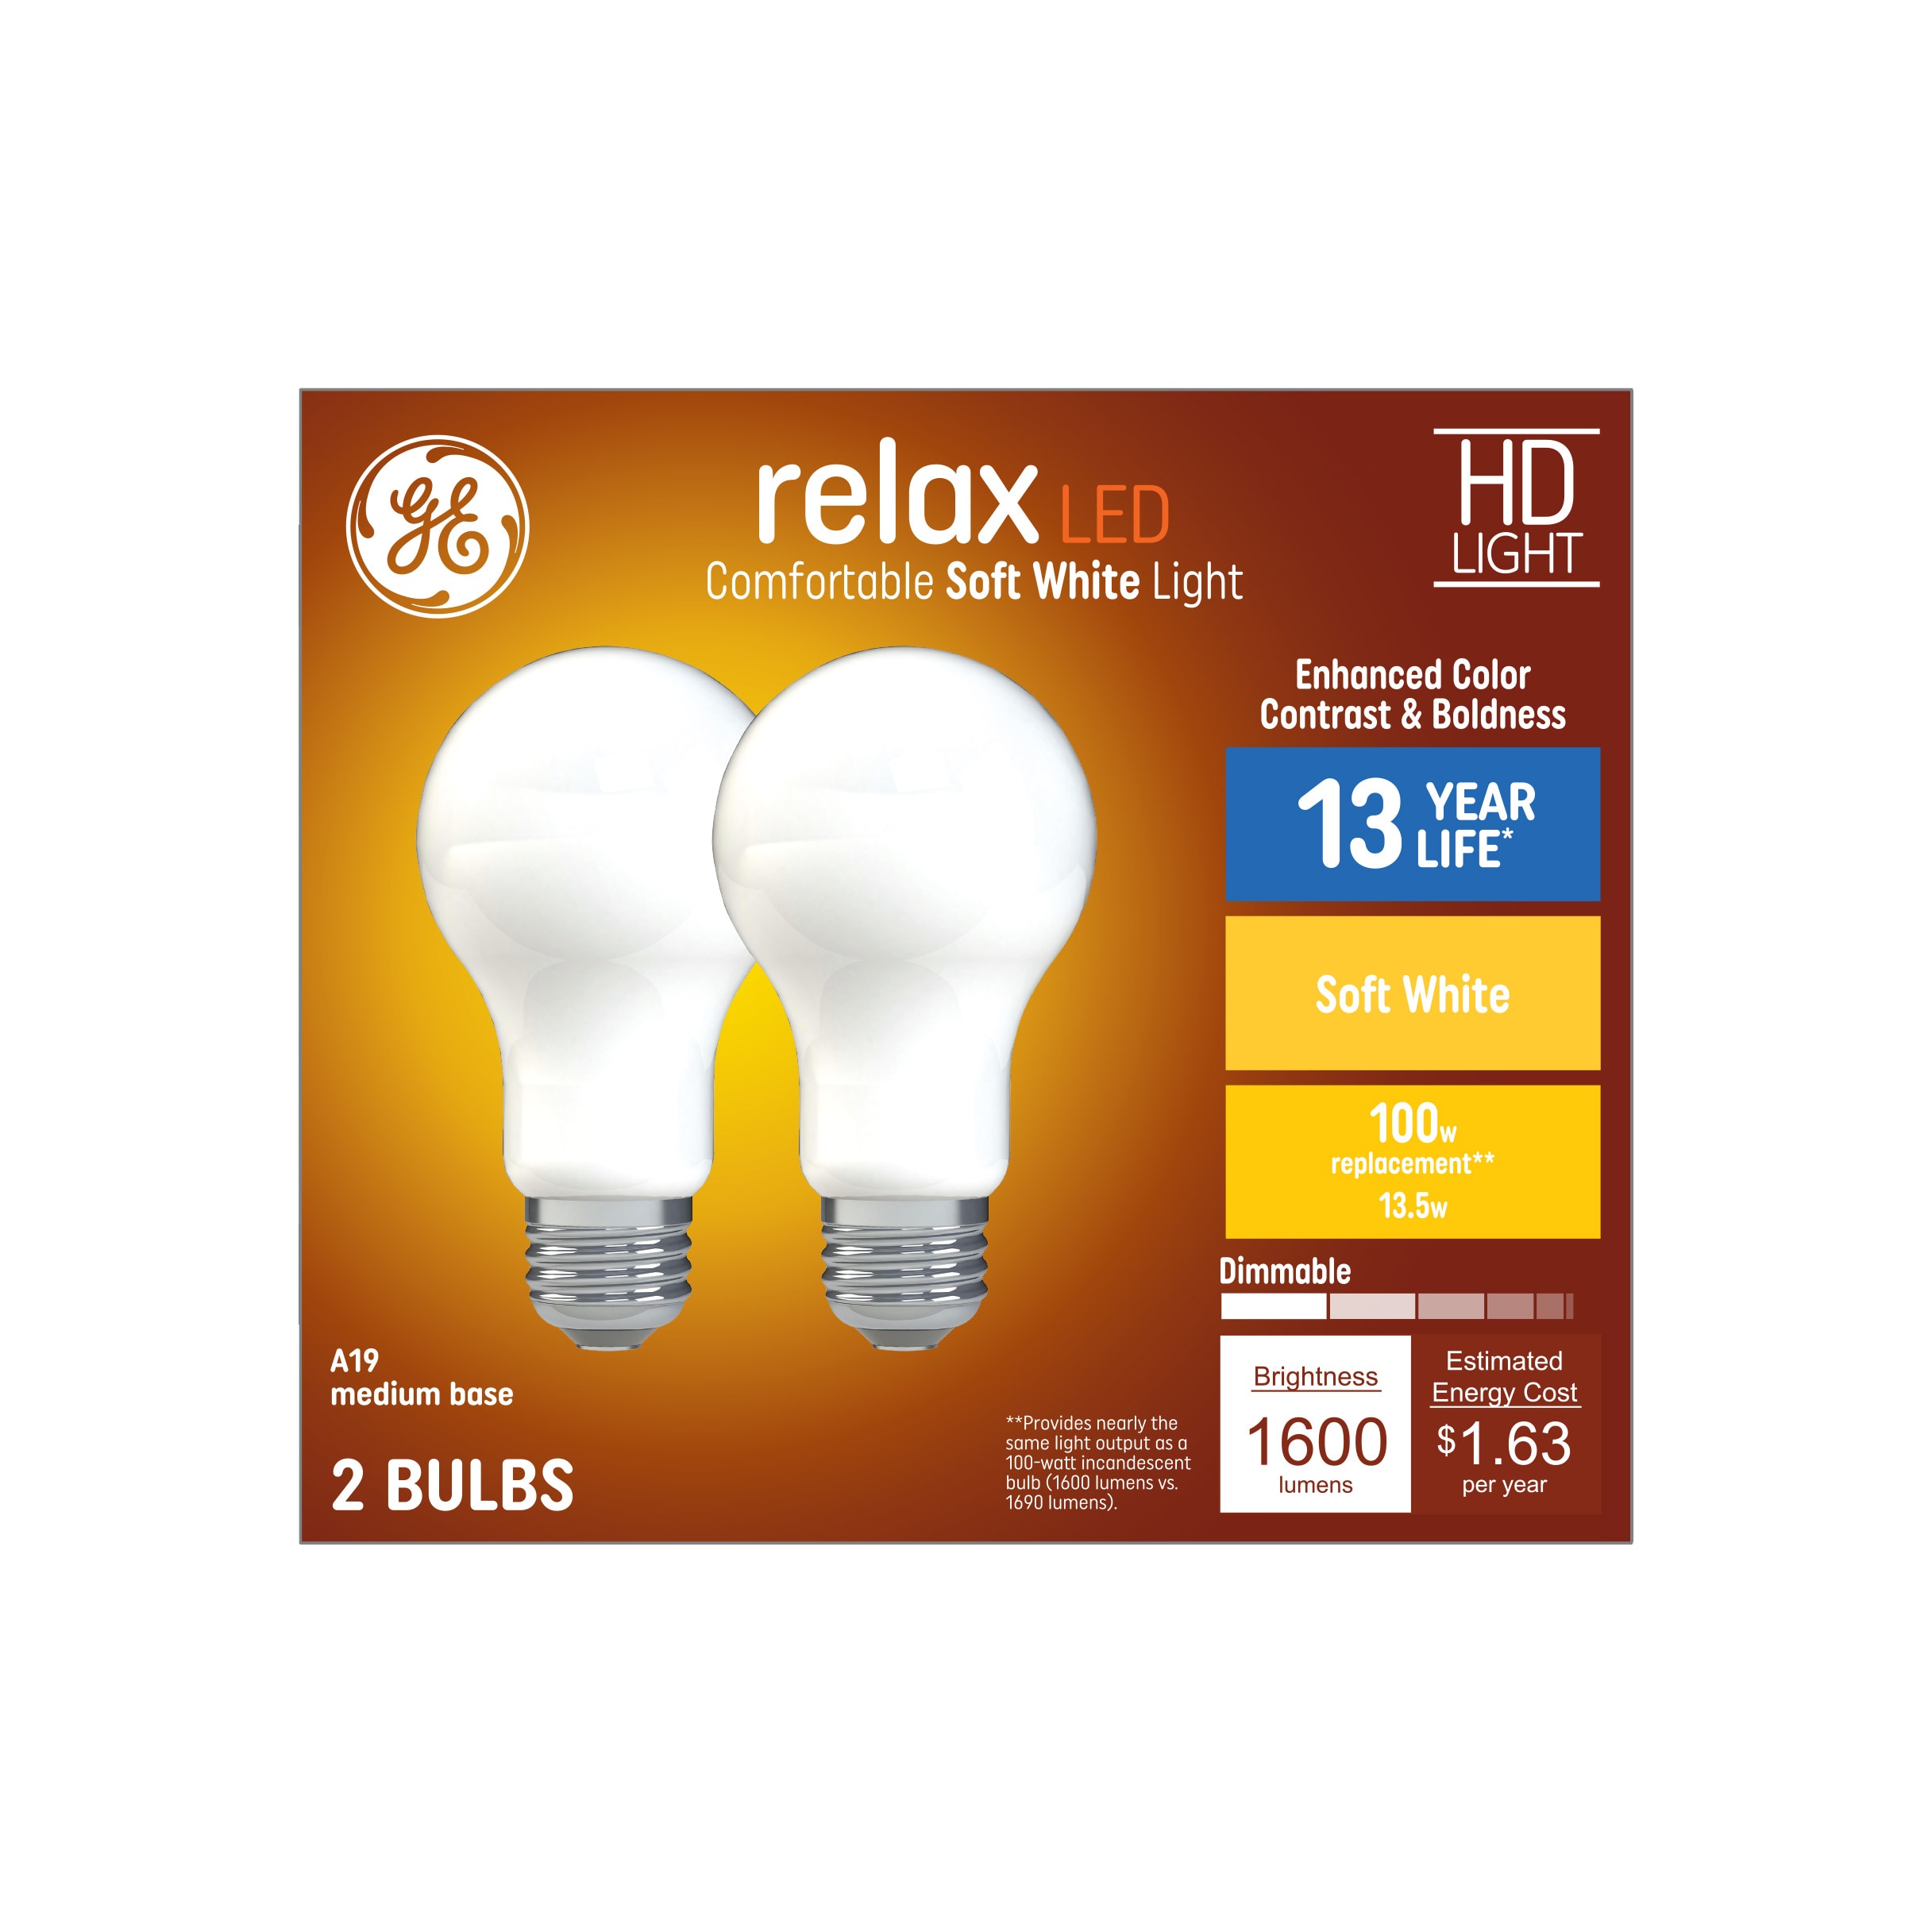 Great Value 100W Equivalent A21 LED Light Bulb, High CRI, Dimmable, Soft  White, For CA Residents, 4-Pack 